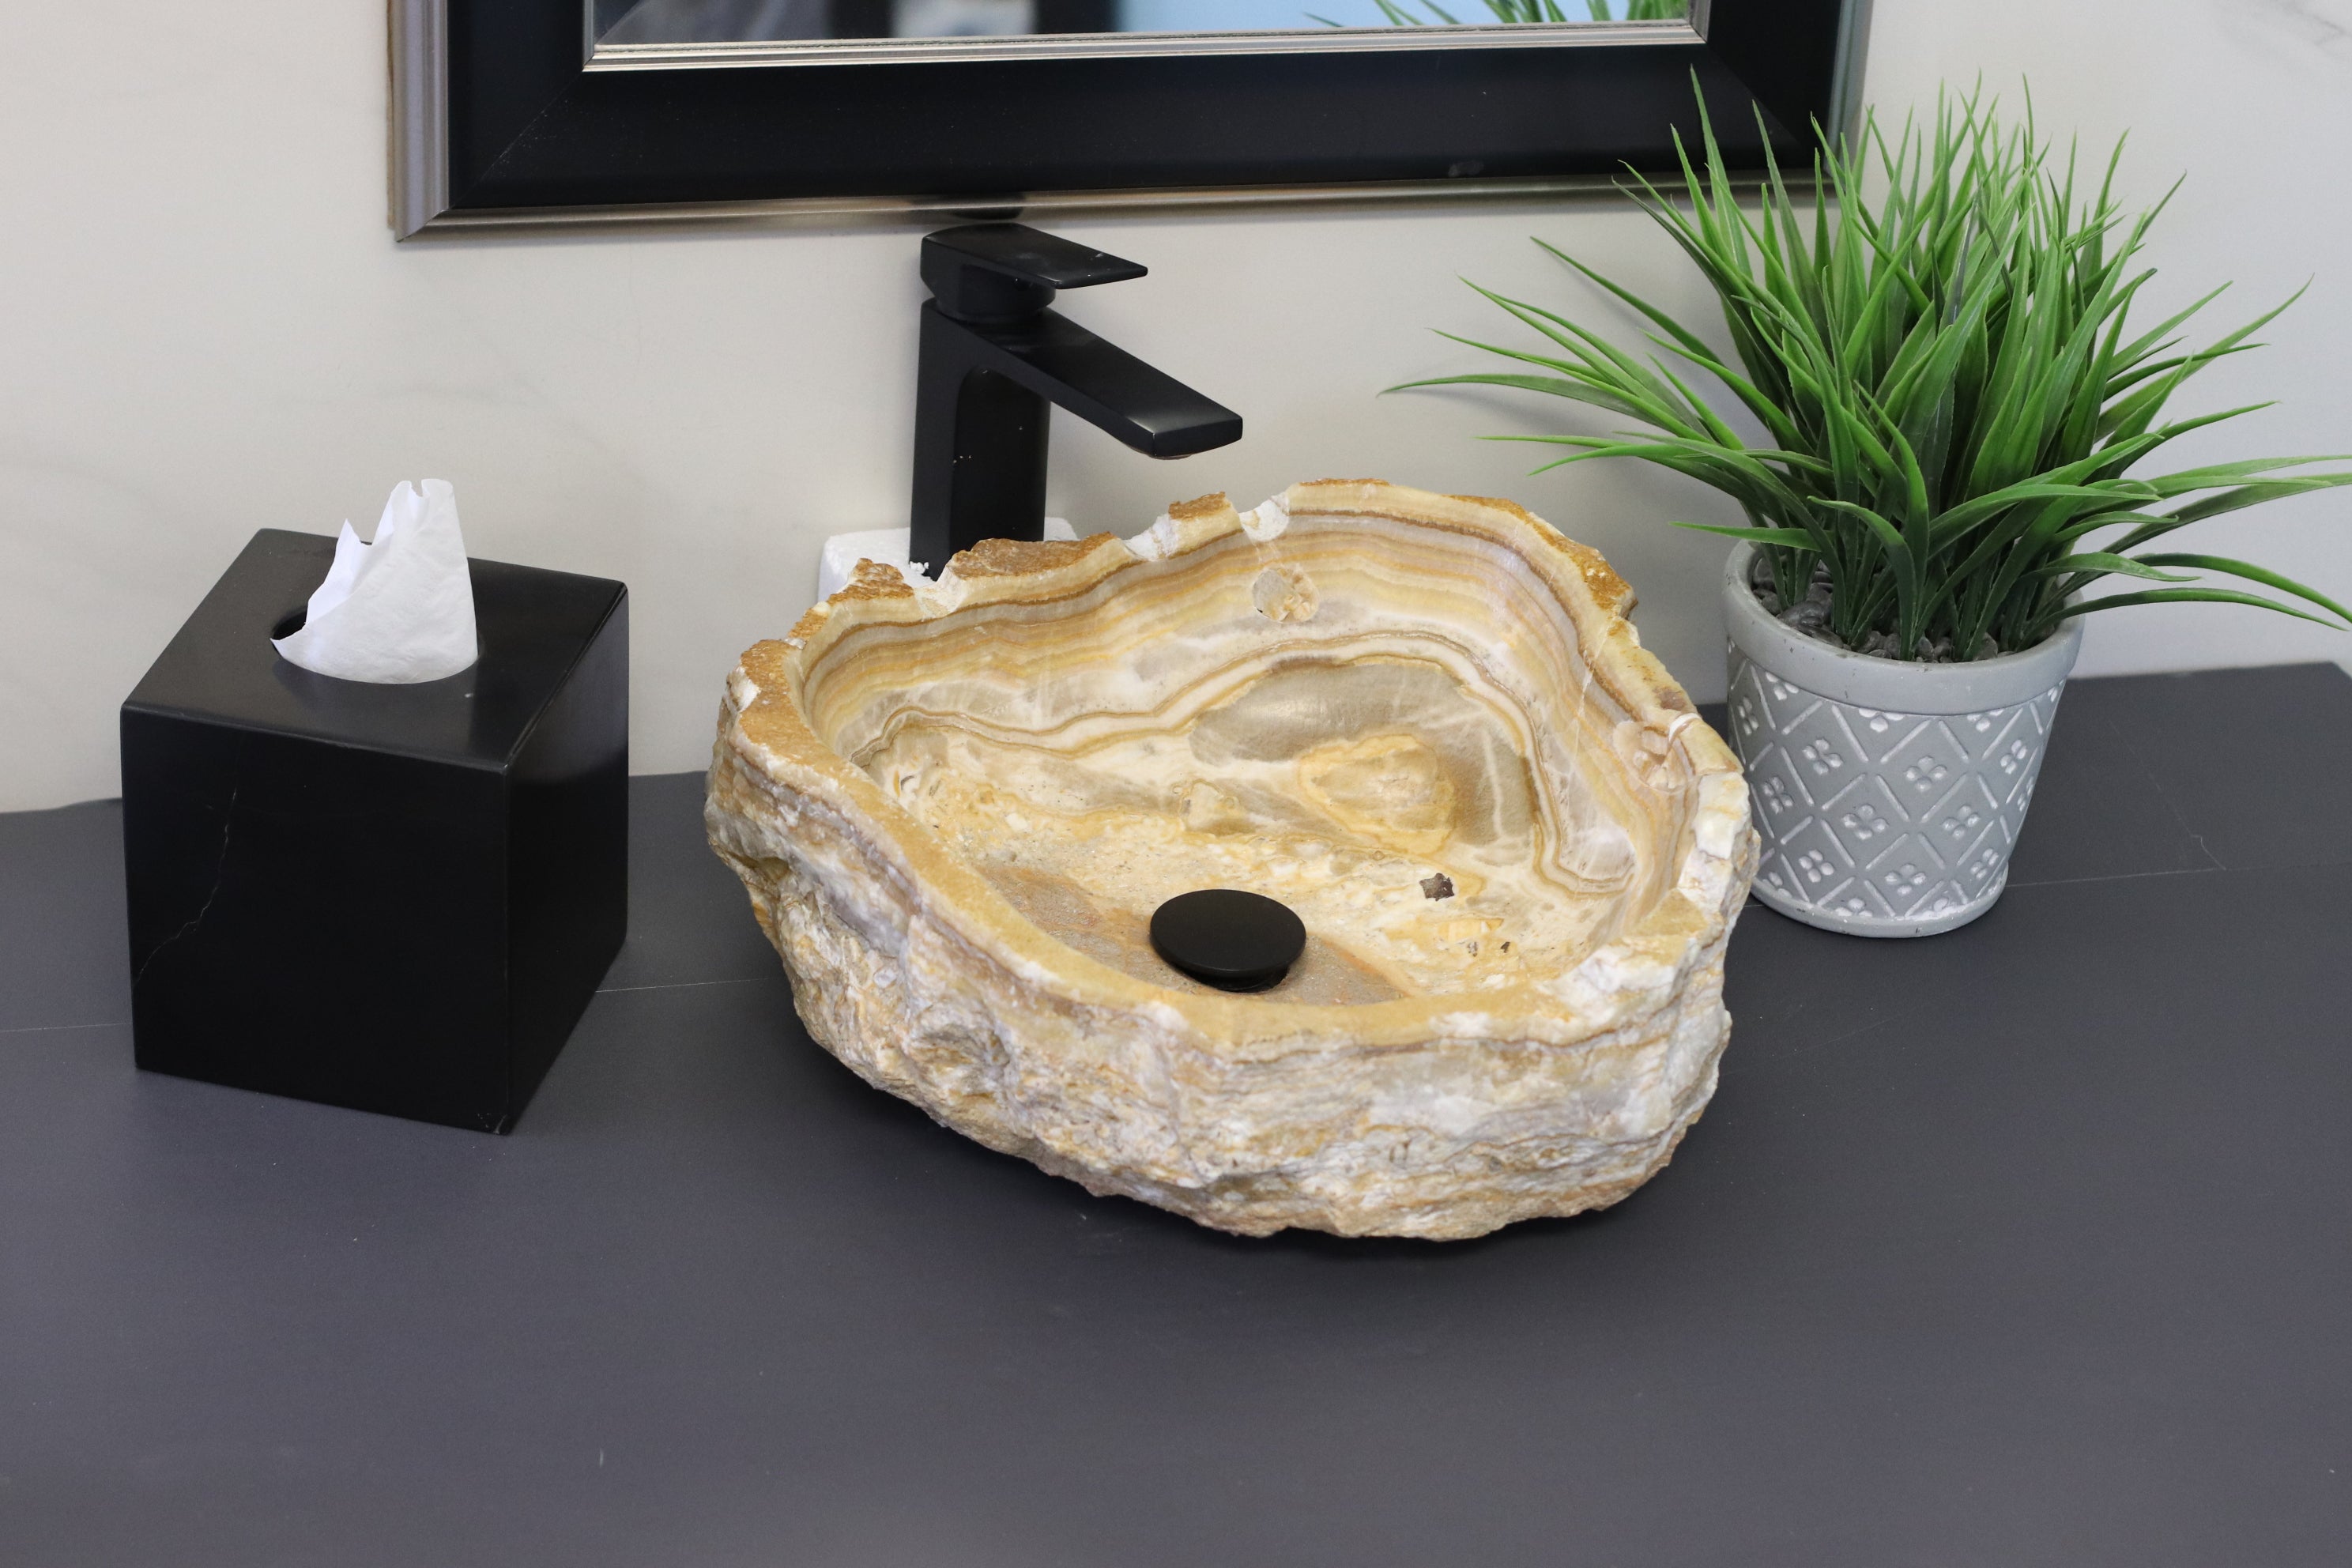  Brown and Orange Onyx Stone Bathroom Vessel Sink. Adobe counter sinks. High-polished Epoxy and Light Stone Sealant available for the inner bowl. Made in Mexico. Hand Finished in USA. Buy Now at www.felipeandgrace.com